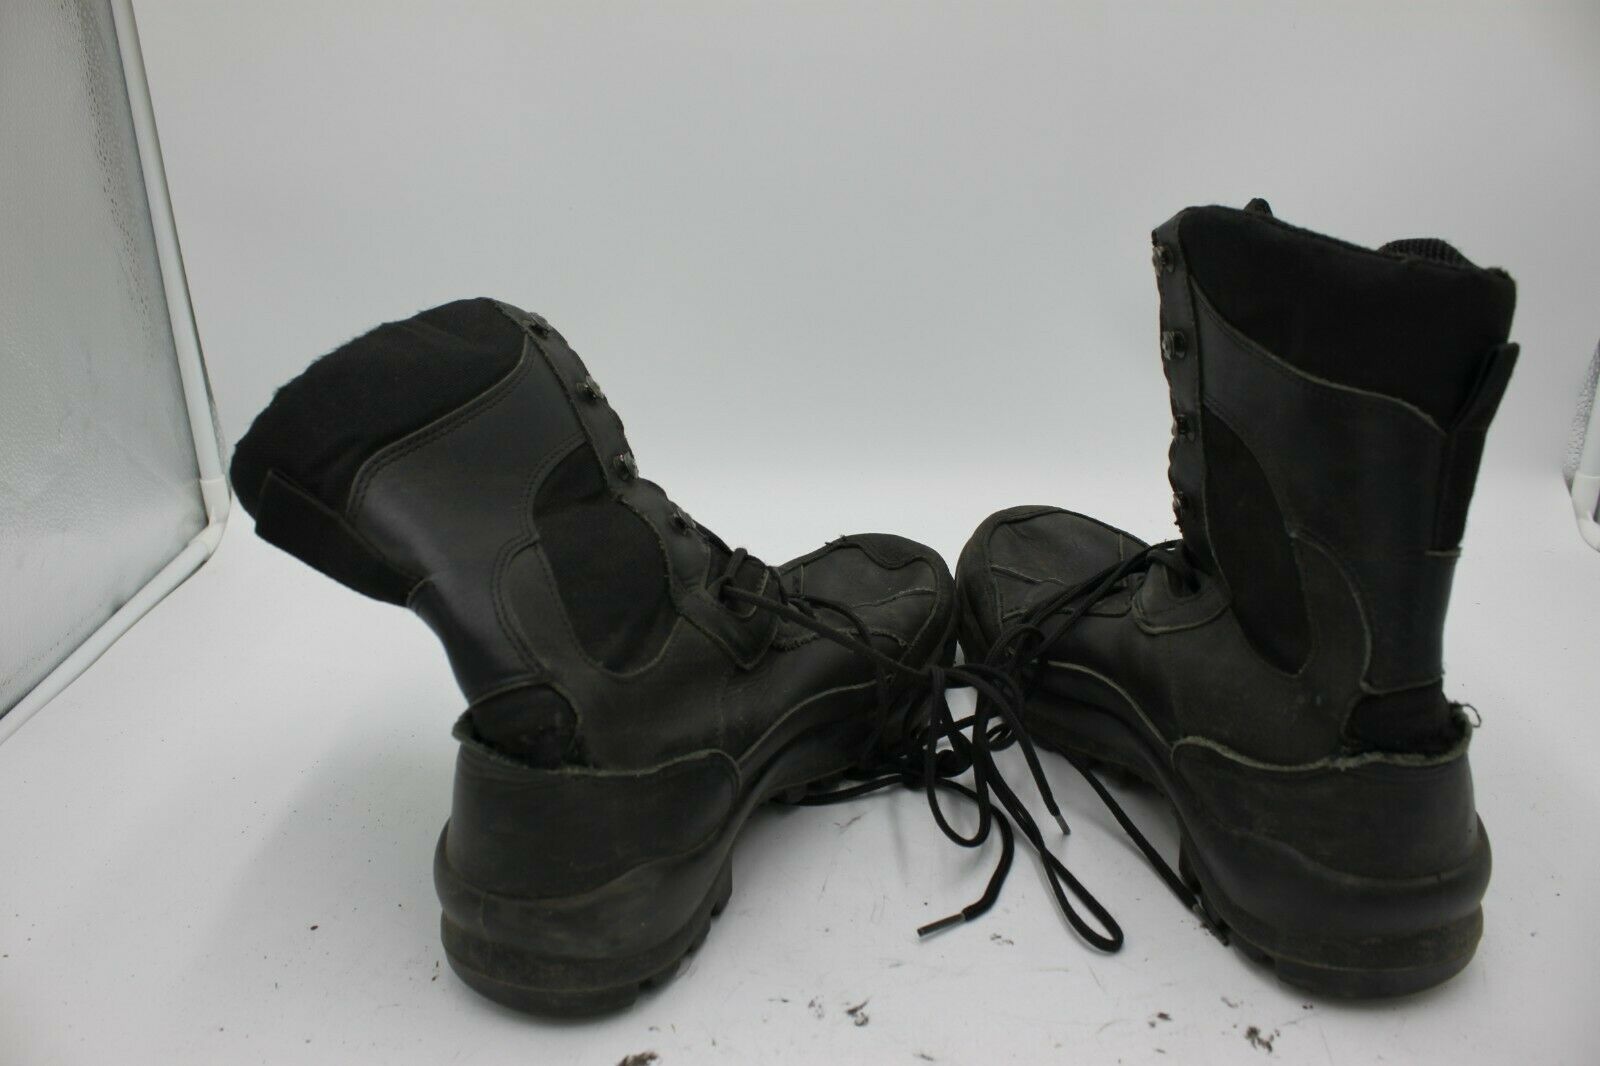 Austrian Military Jungle Combat Boots Stumpp & Baier Lightweight Used Size 10 US (ASB464310)